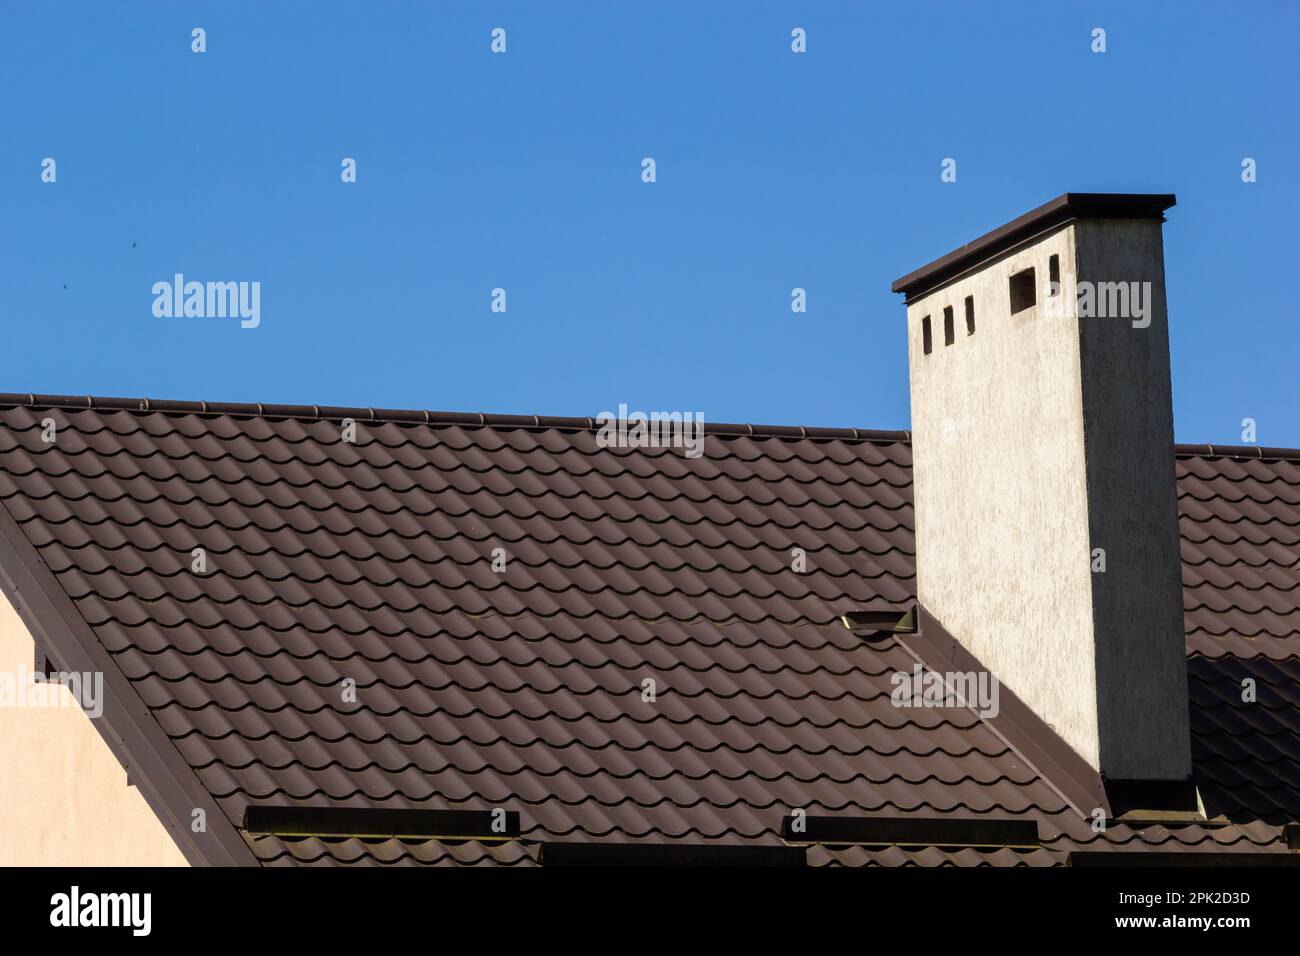 Roof of a new home. Ceramic chimney, metal roof tiles, gutters, roof window. Single family house. Stock Photo